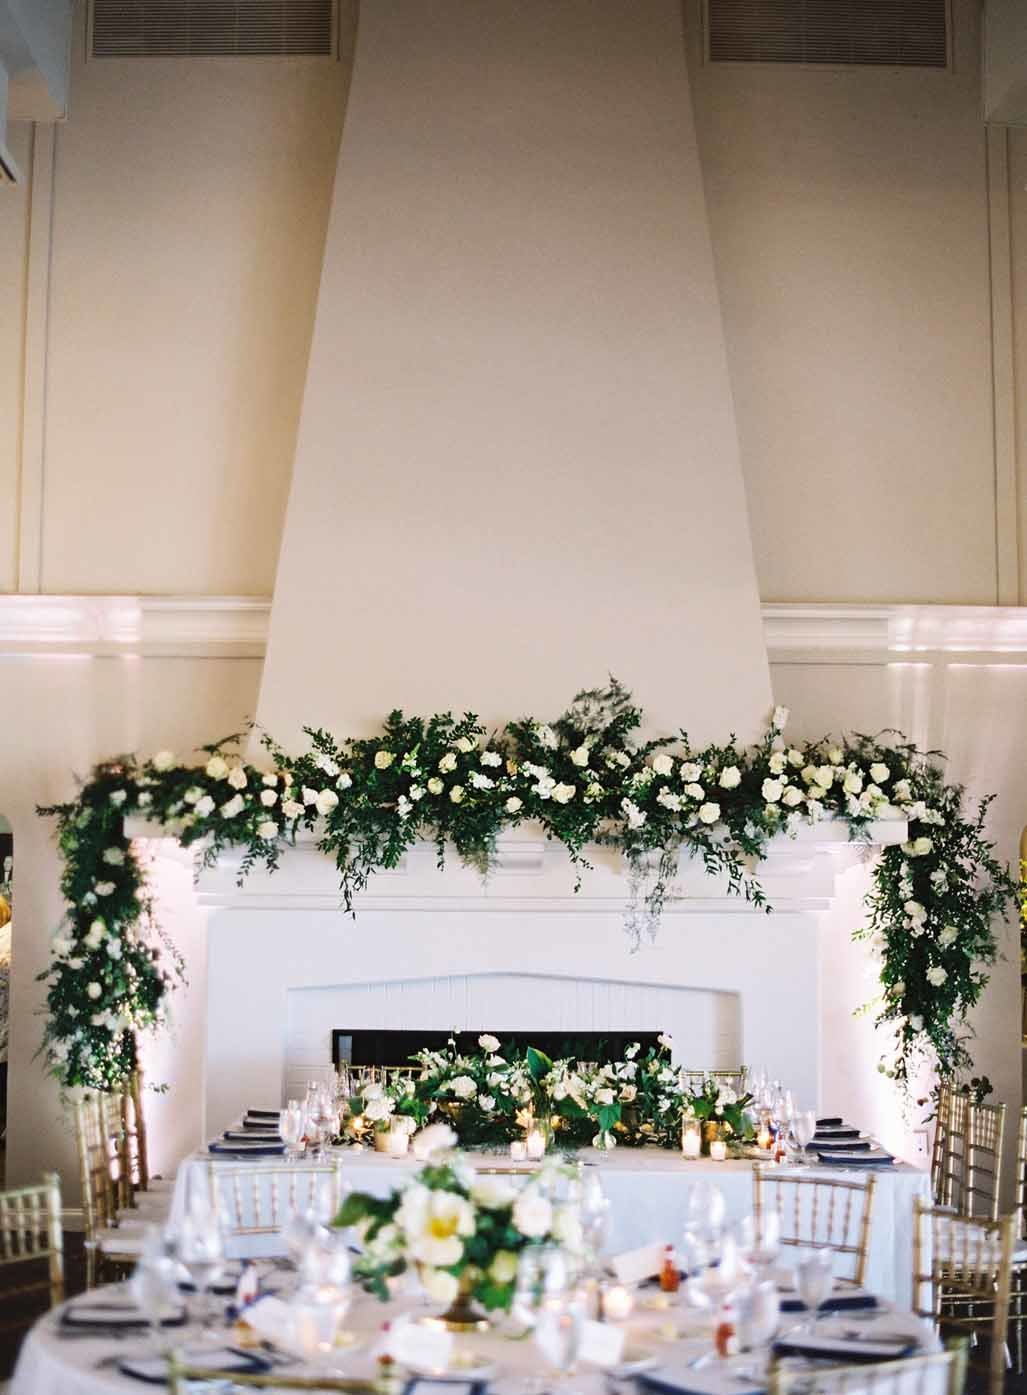 wedding reception head table  in front of large white fire place with greenery arch on top of fireplace mantle